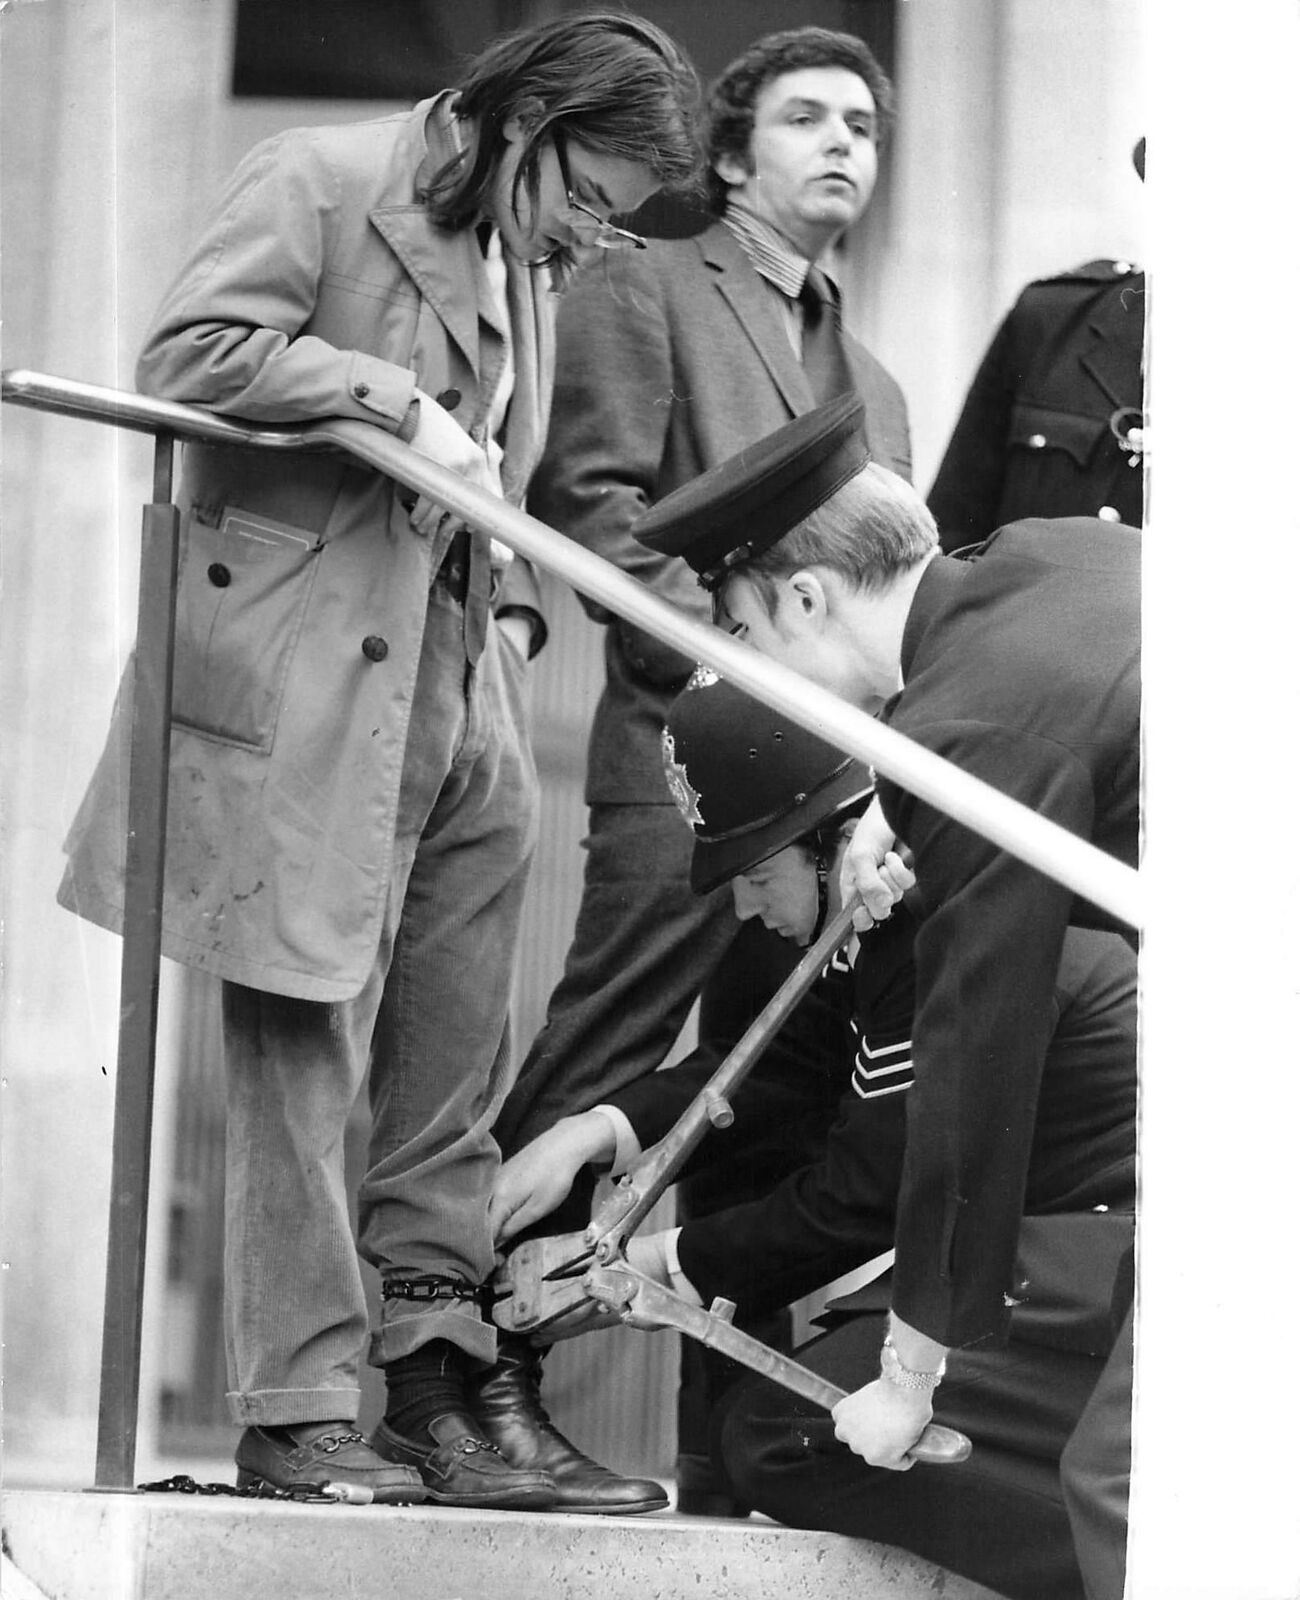 1972 Press Photo Anti Vietnam War Protesters Chained, Police Bolt Cutters London